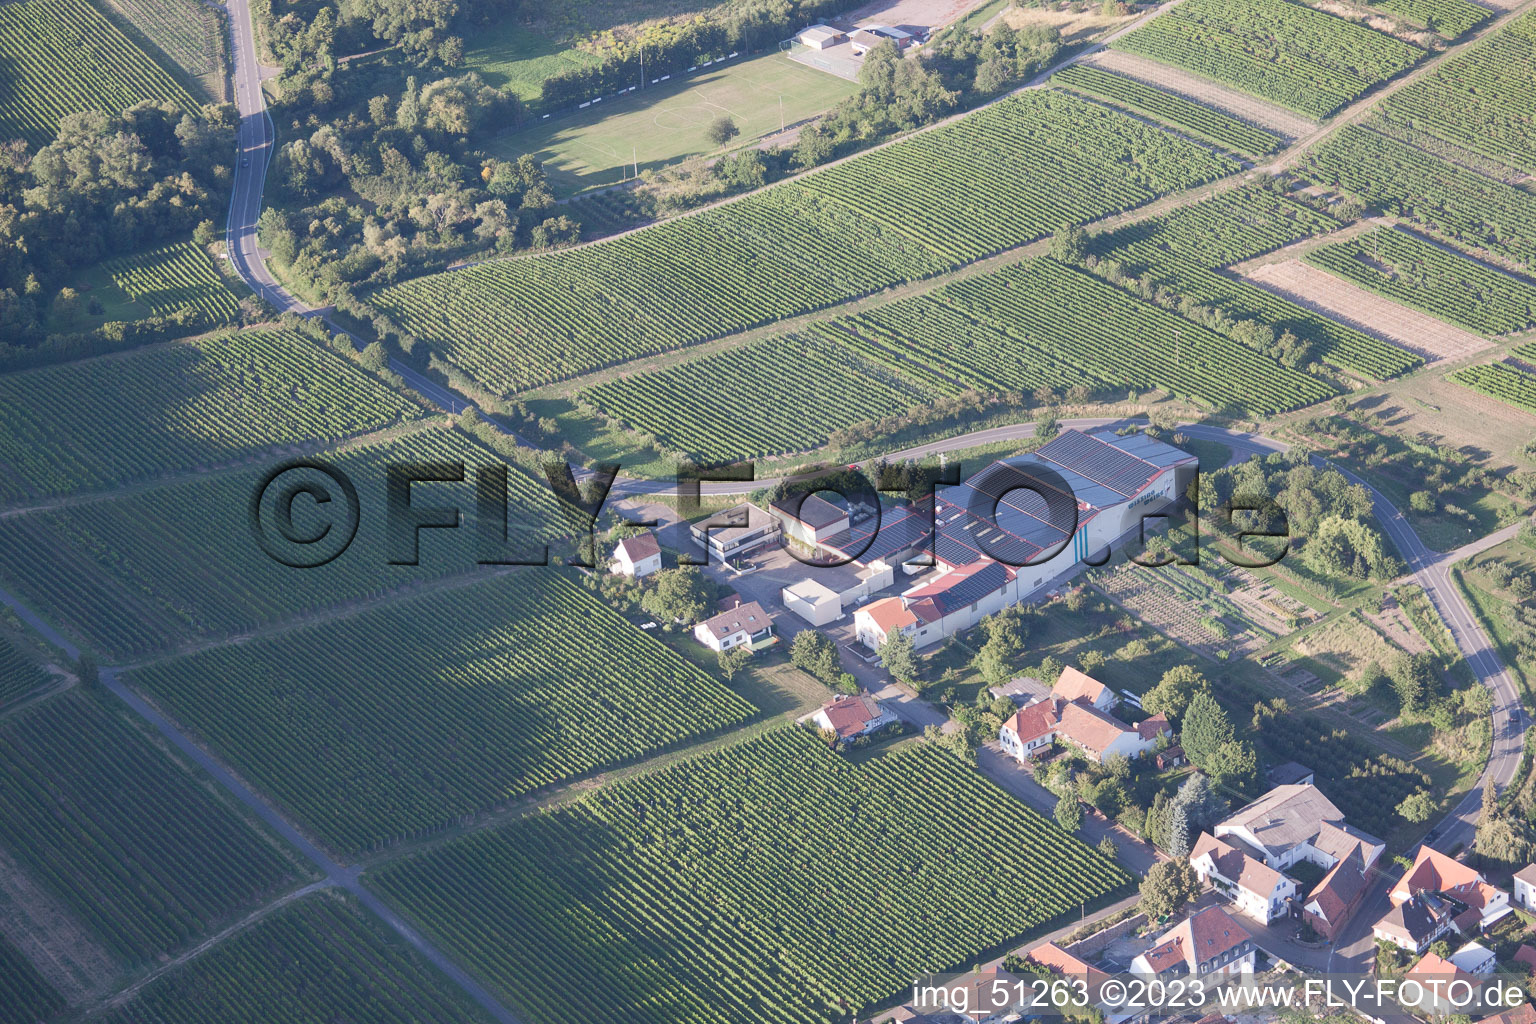 Oblique view of Wissing wines in Oberotterbach in the state Rhineland-Palatinate, Germany